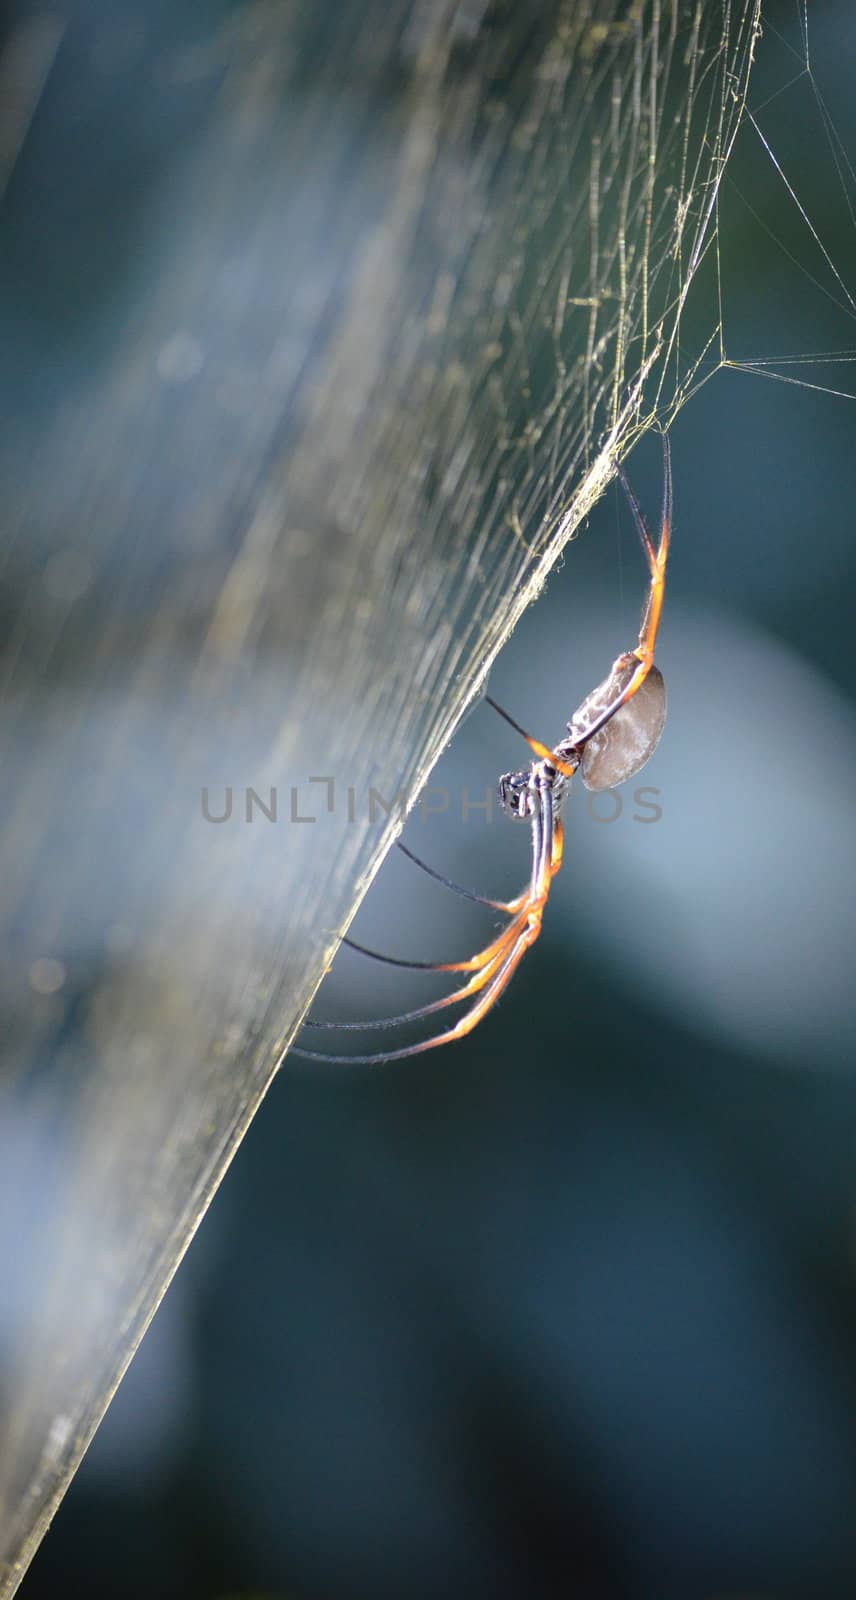 Spider in a spider web by KirbyWalkerPhotos